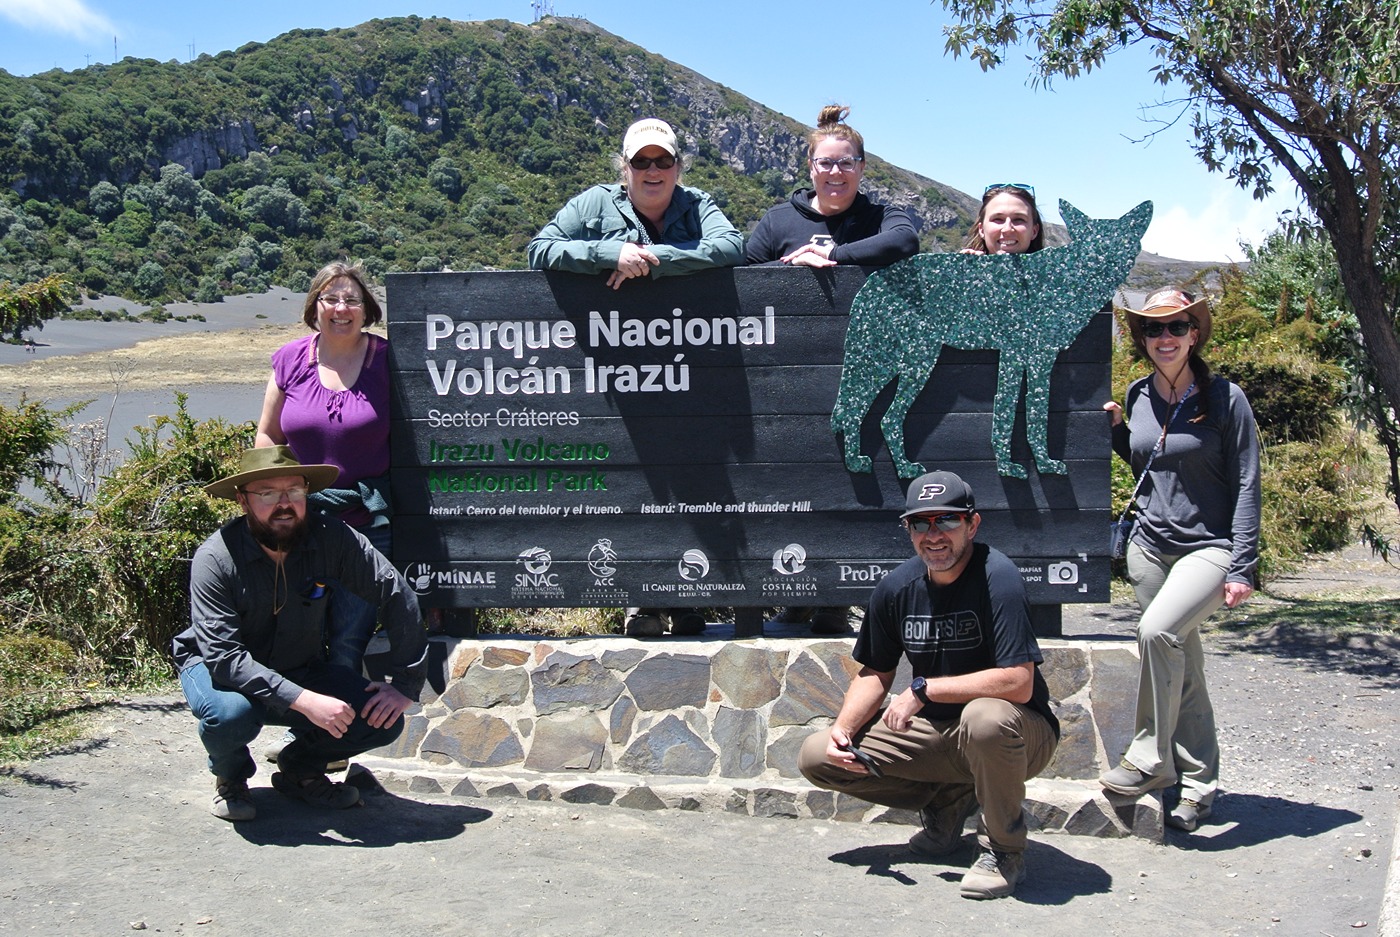 Group of Purdue Extension agriculture and natural resources educators around Parque Nacional Volcan Irazu sign in Costa Rica.